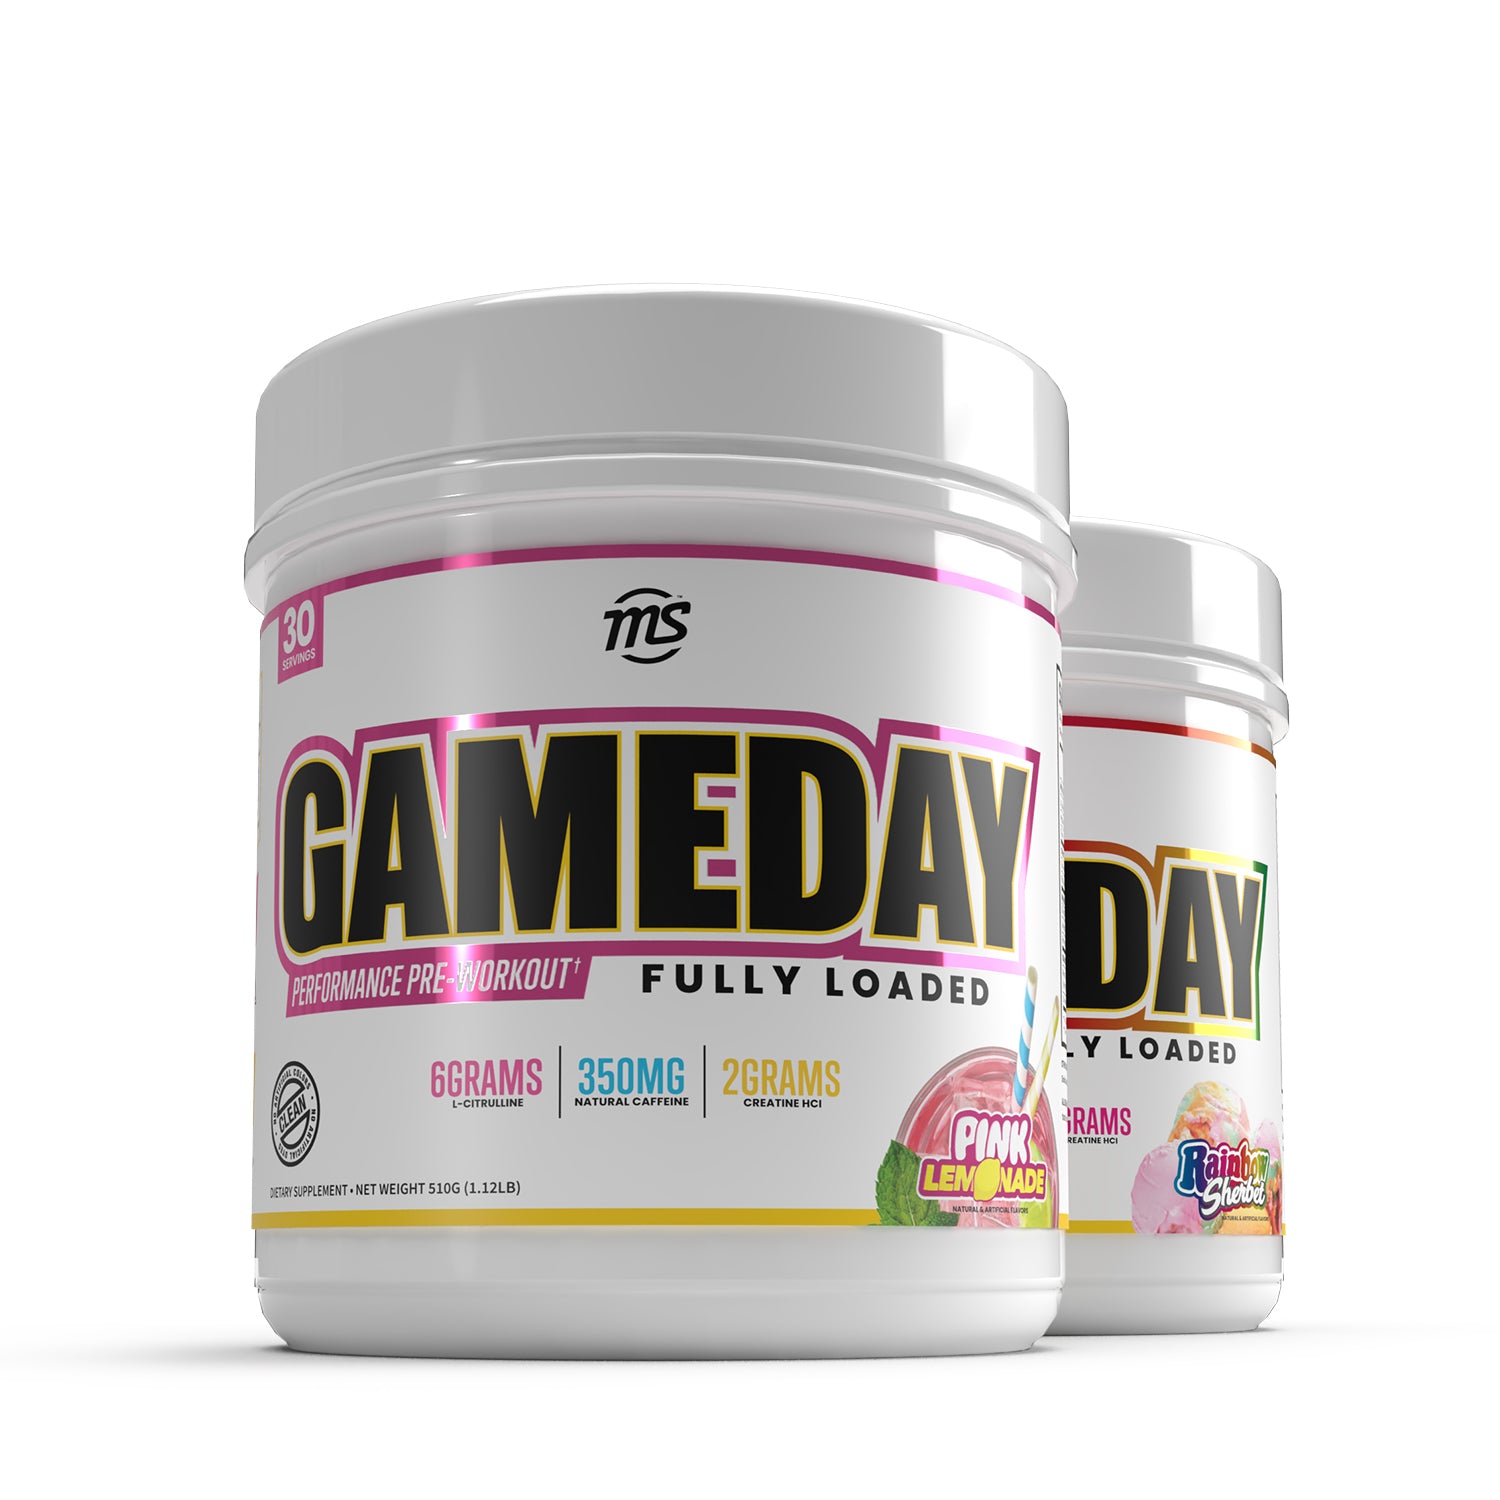 Game Day Fully Loaded - Buy 1 Get 1 50% OFF